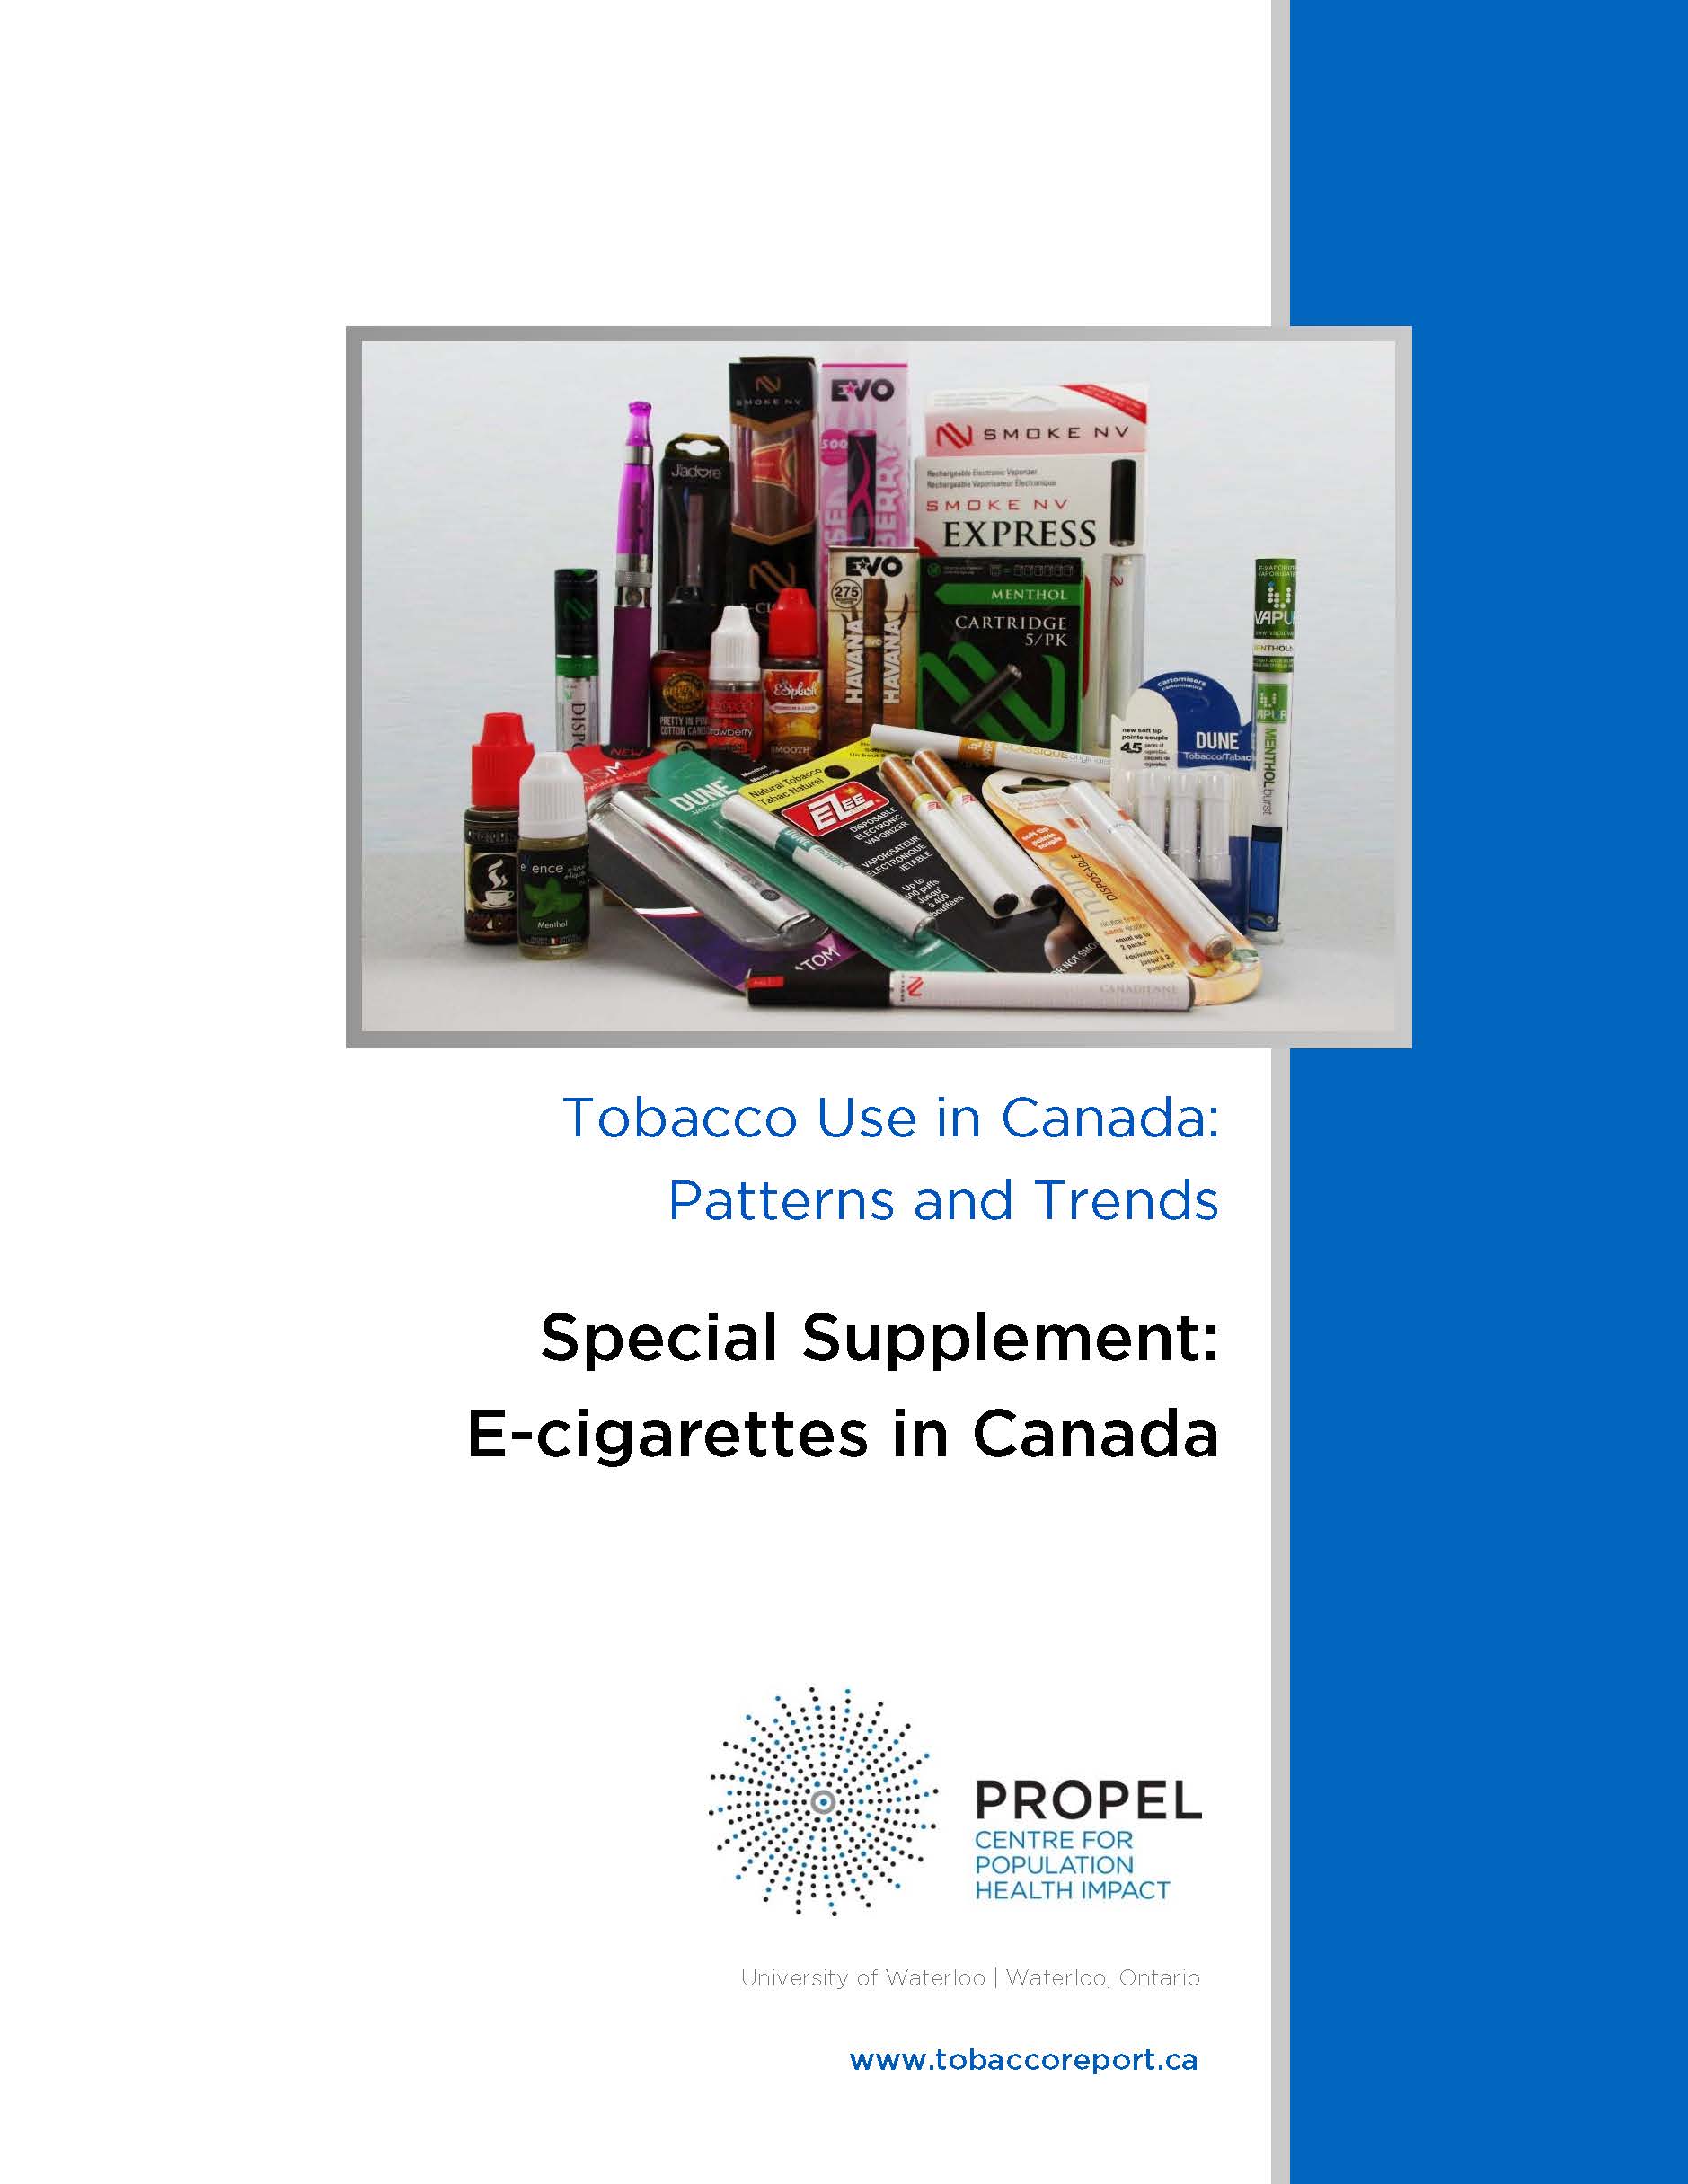 E-cigarette cover page: Tobacco use in Canada: Patterns and trends. Special Supplement: E-cigarette in Canada. Prepared by Propel Centre for Population Health Impact.